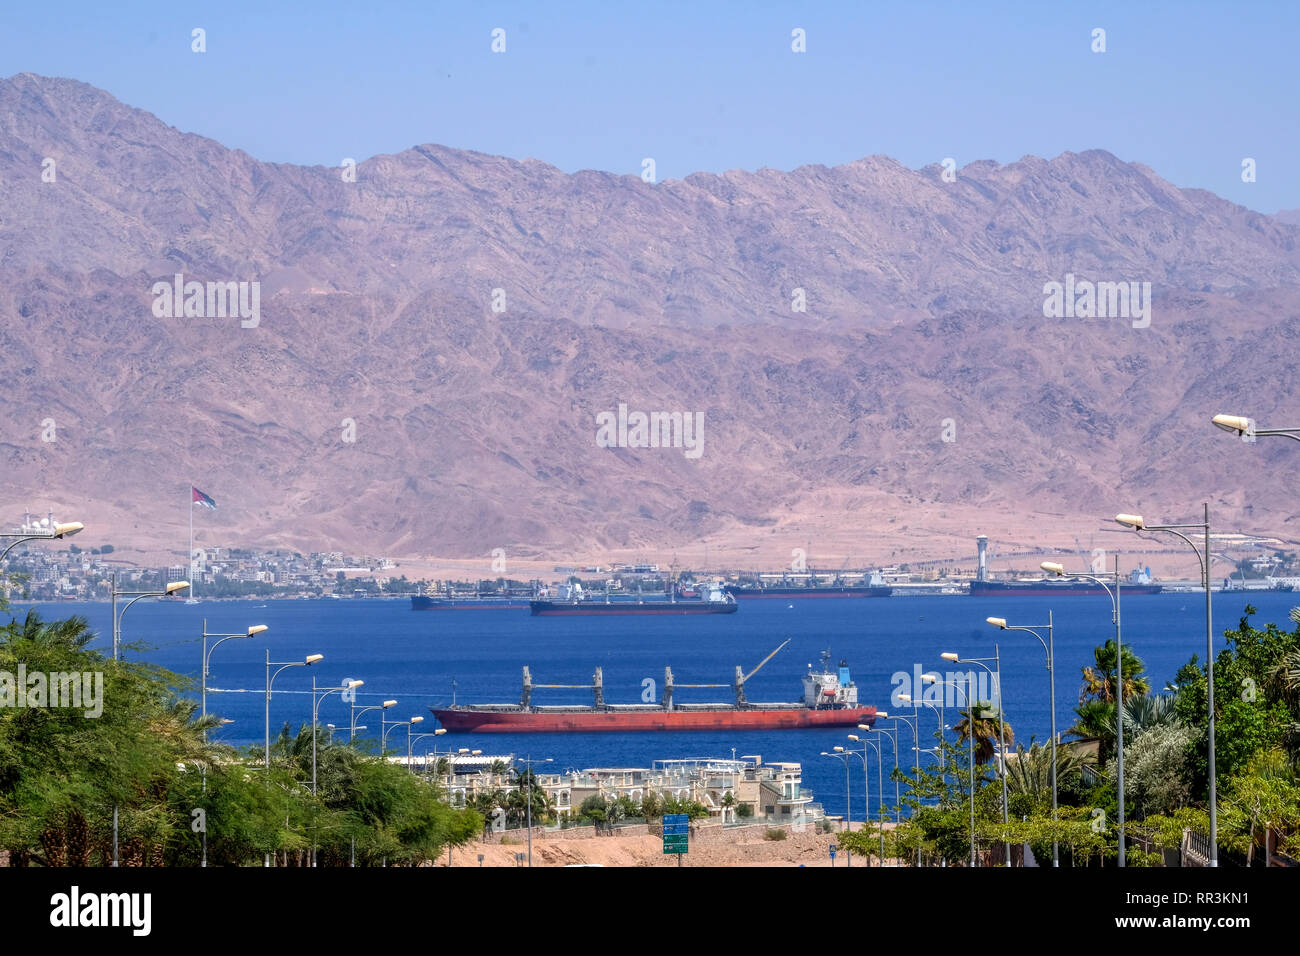 Panoramic view of the Bay of Eilat, Israel Stock Photo